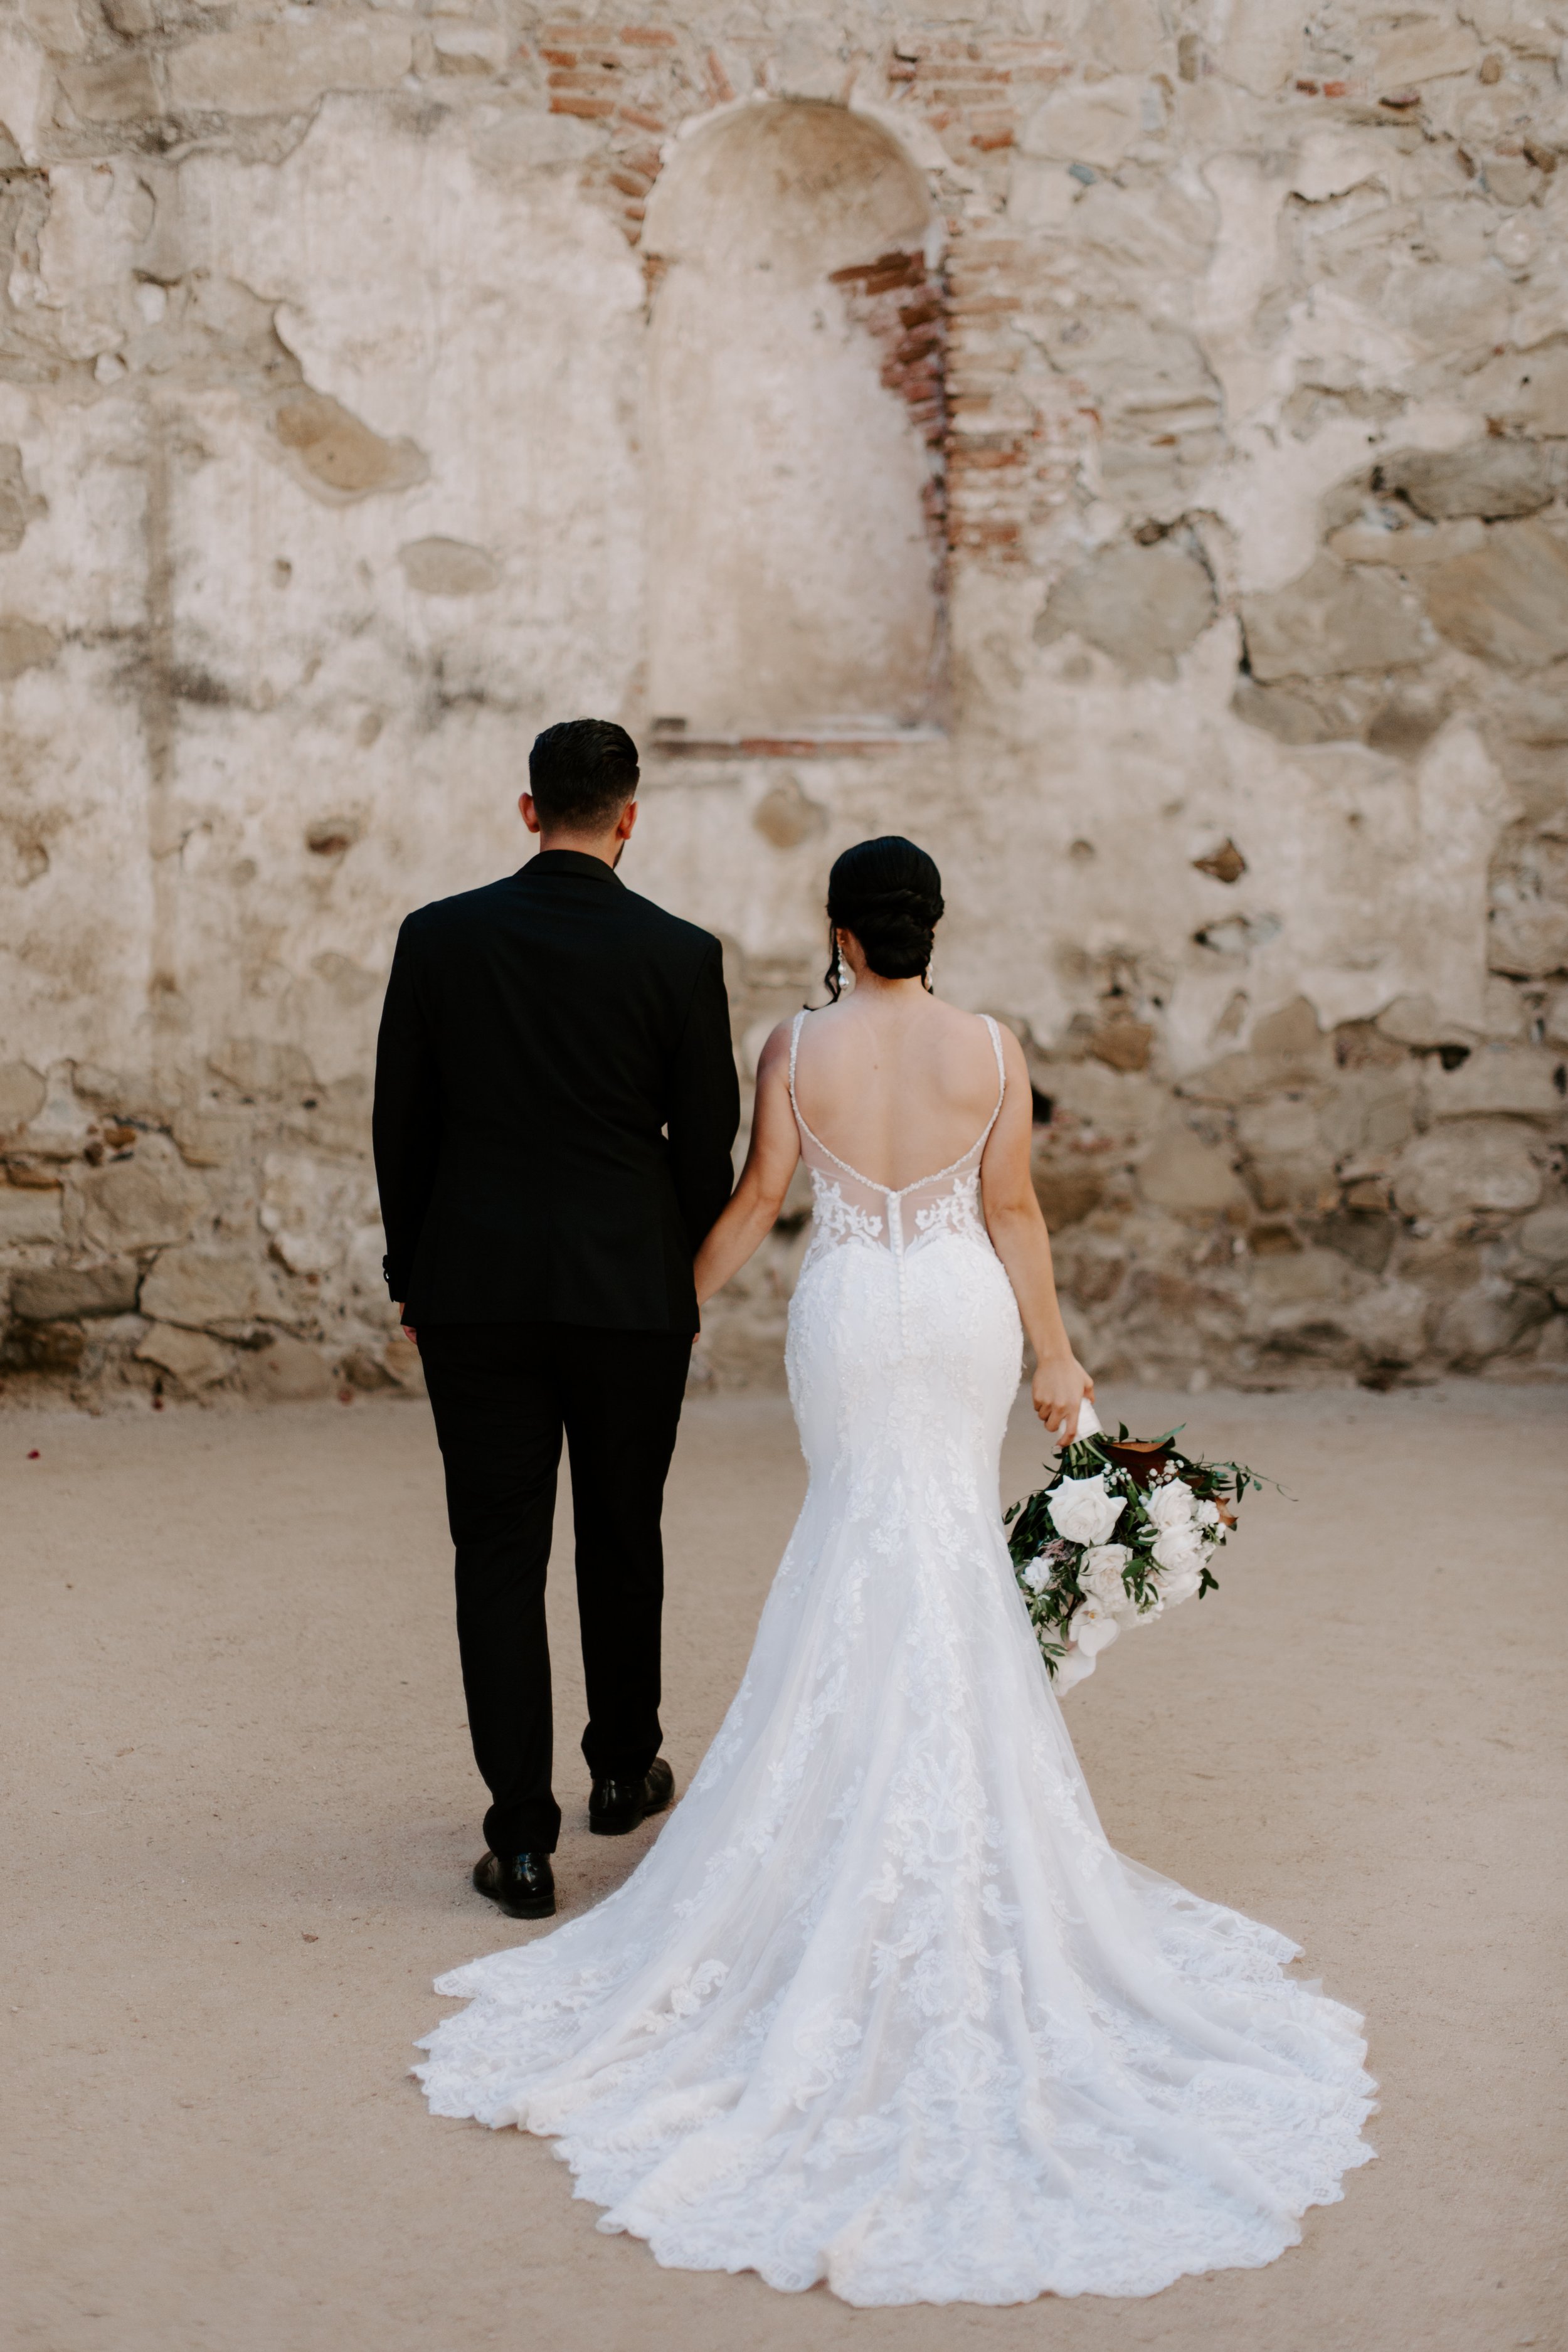 Ashley and Andrew Wedding at the San Juan Capistrano Mission and the Franciscan Gardens by Kara Reynolds Photography218.jpg